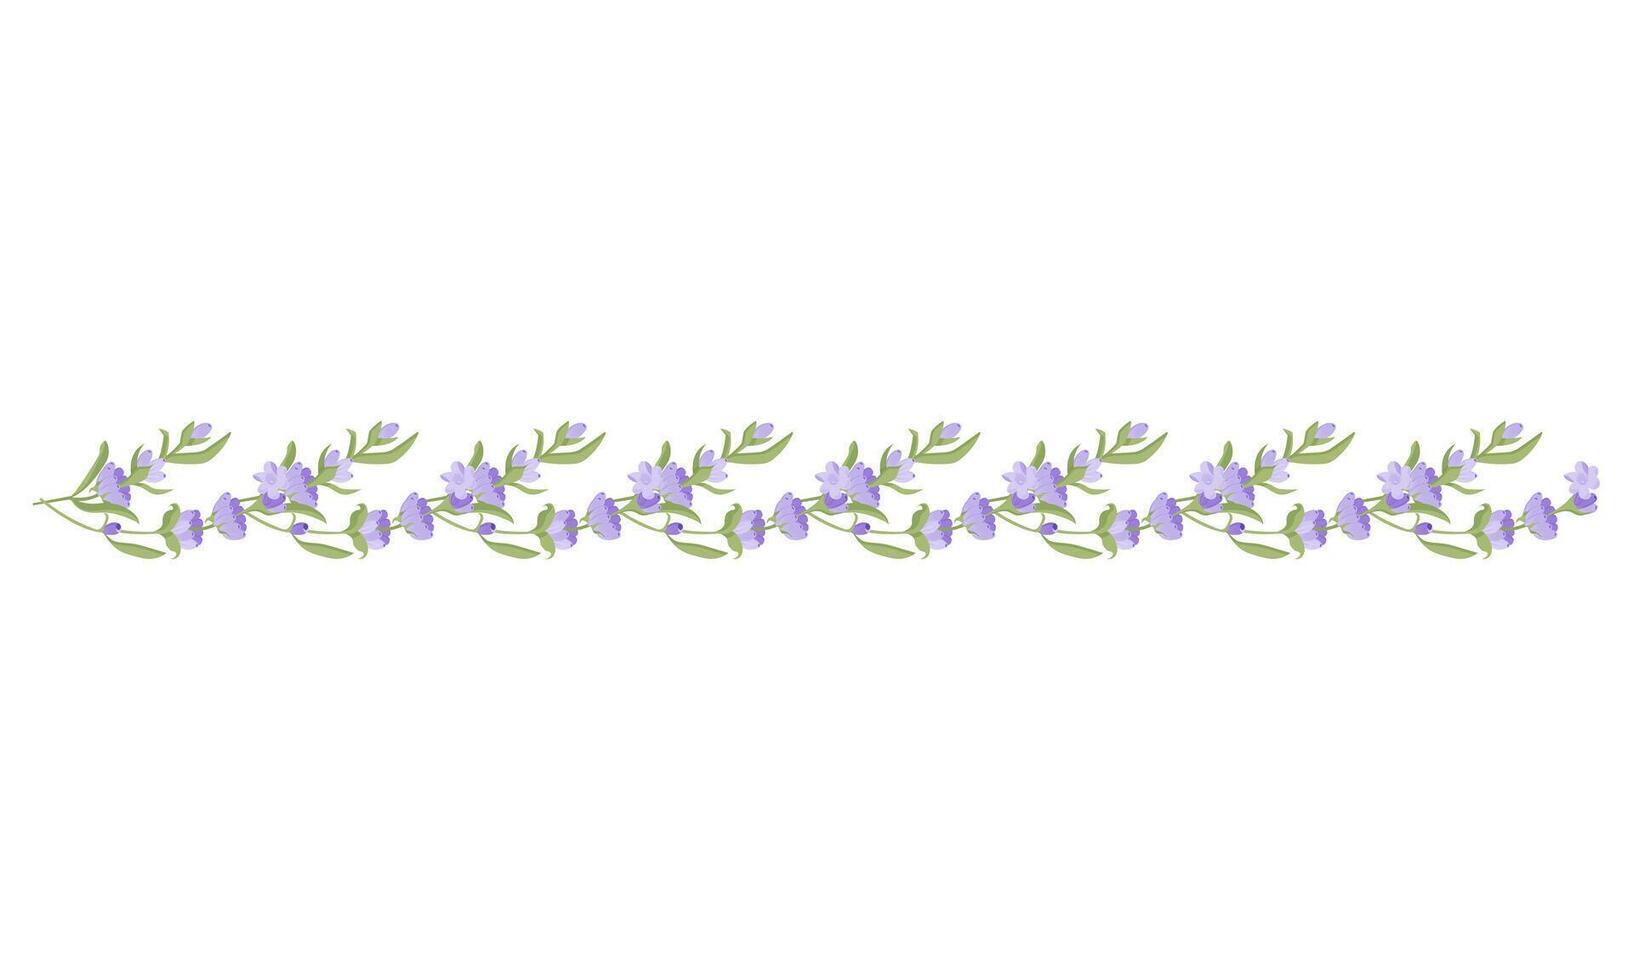 Decorative border of lavender flowers for your design. illustration isolated on white background. vector